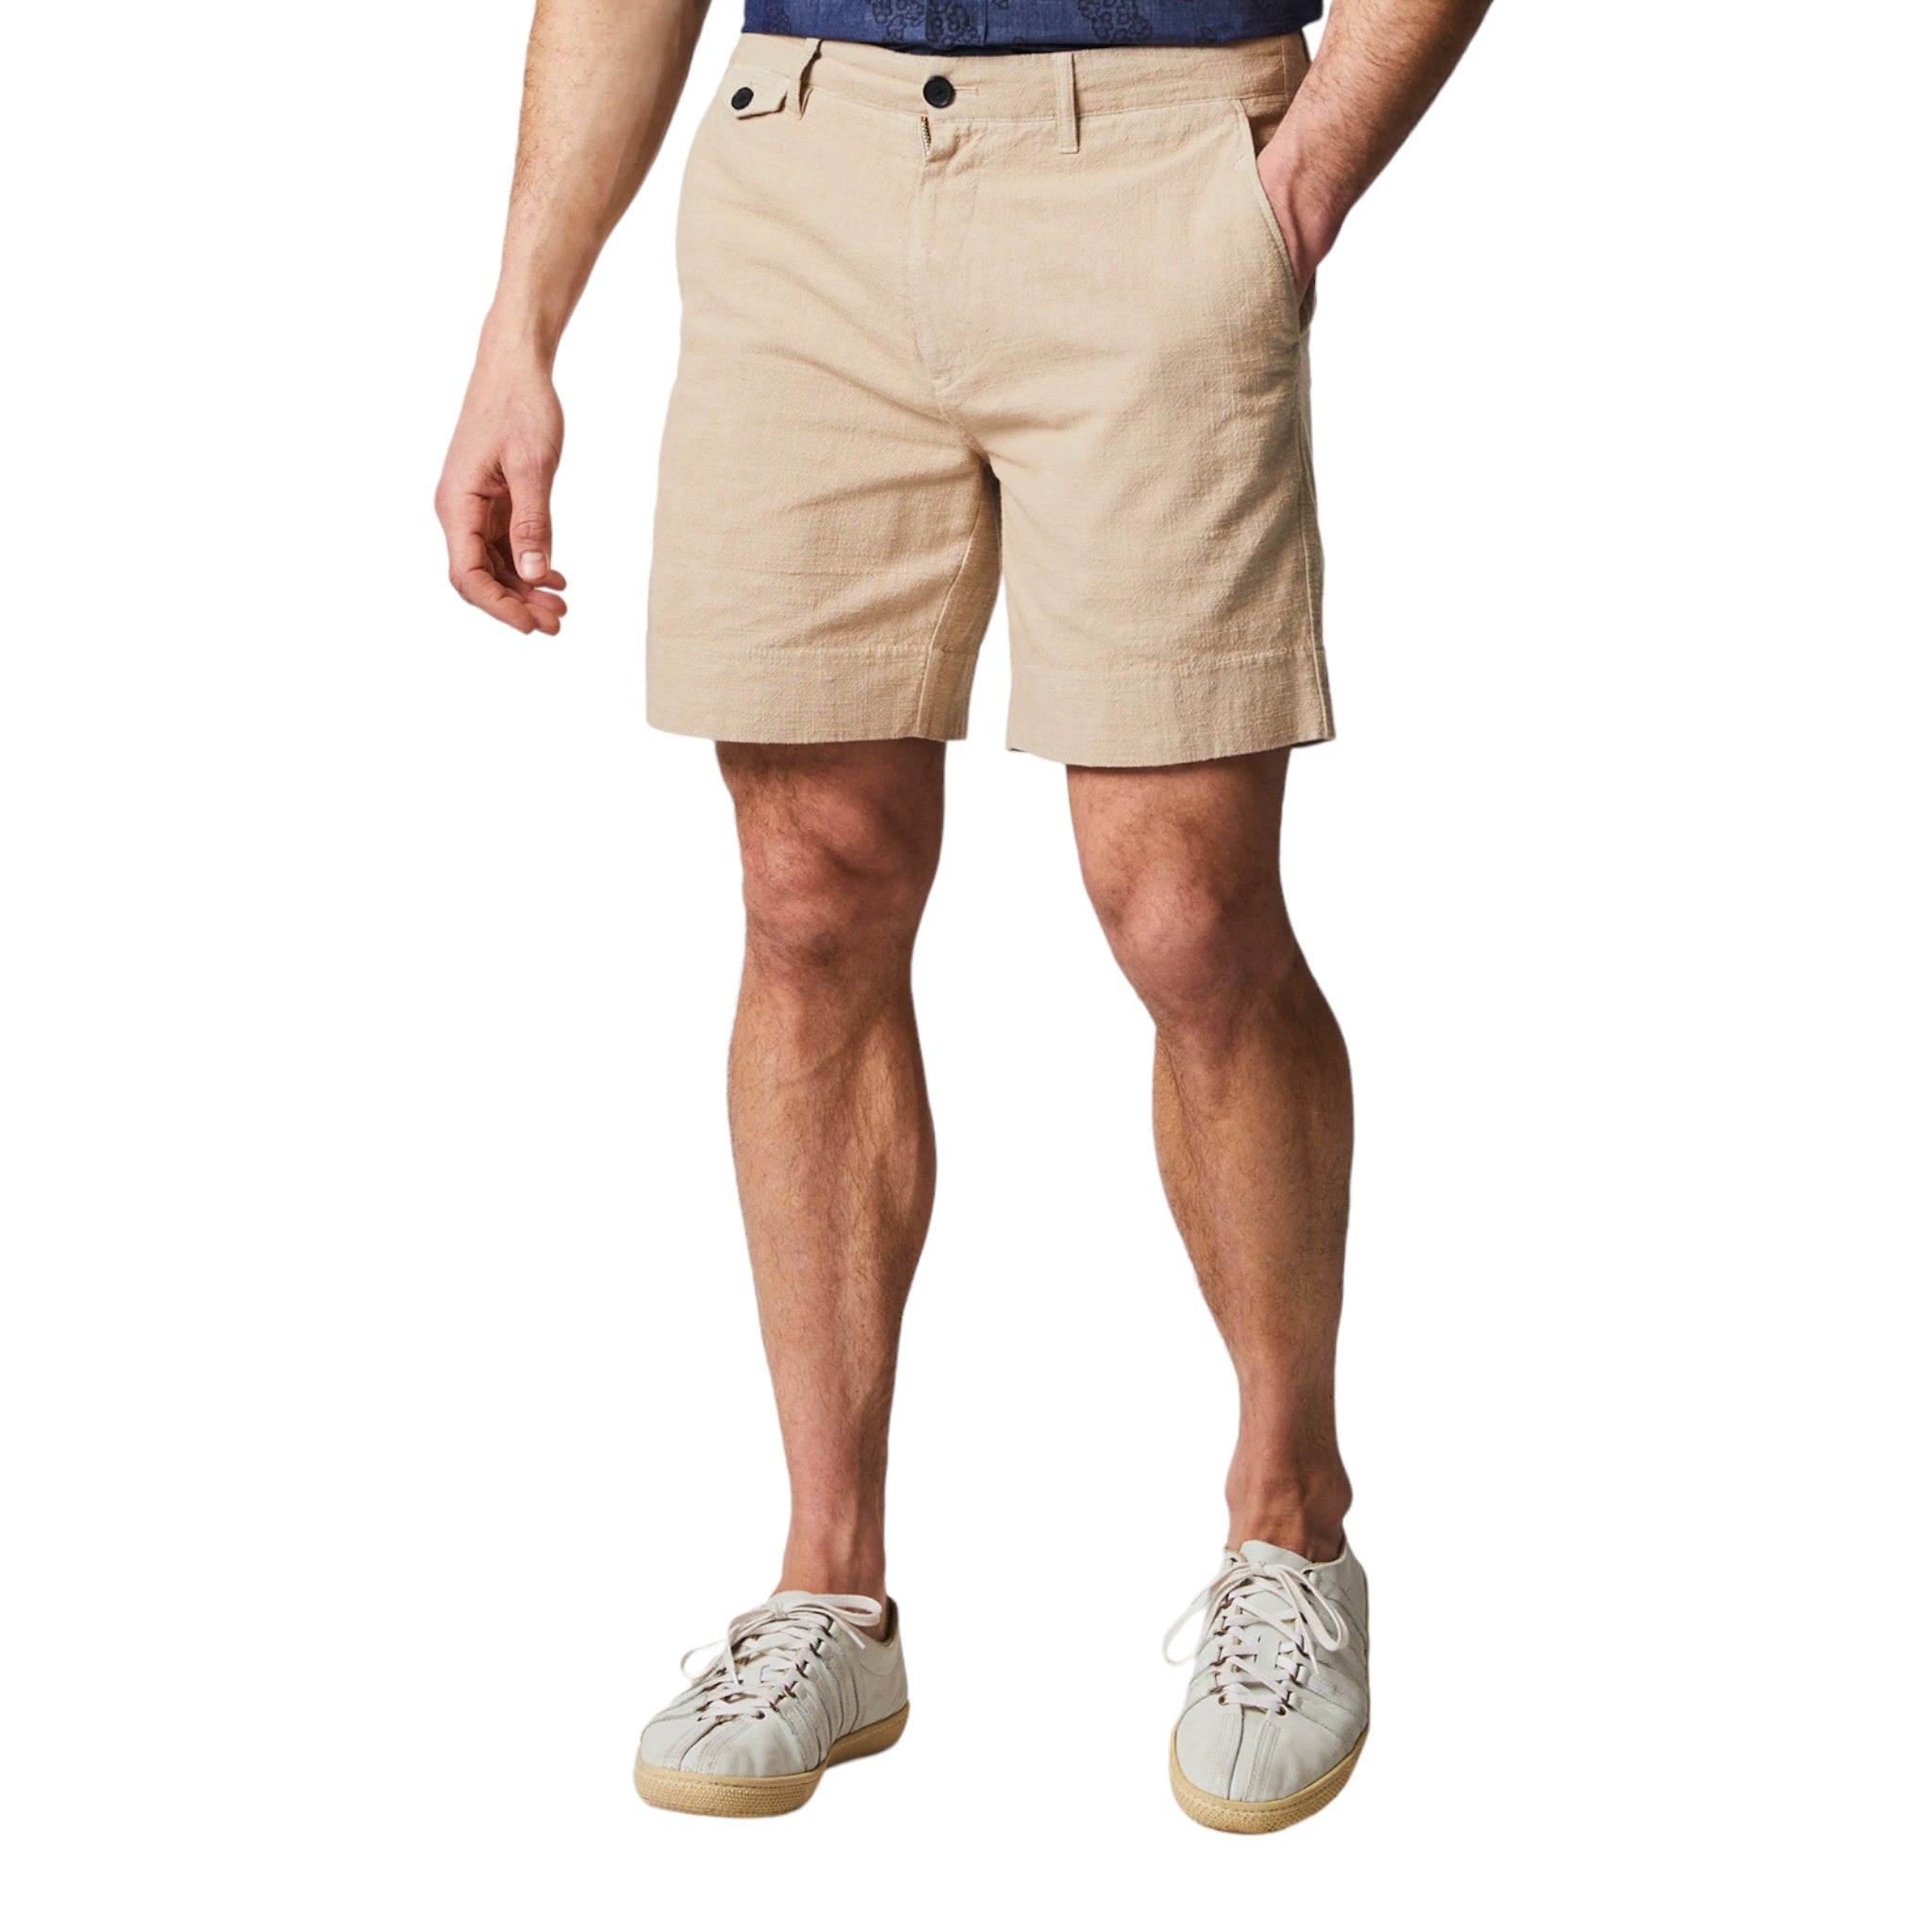 Khaki shorts with button and zip closure